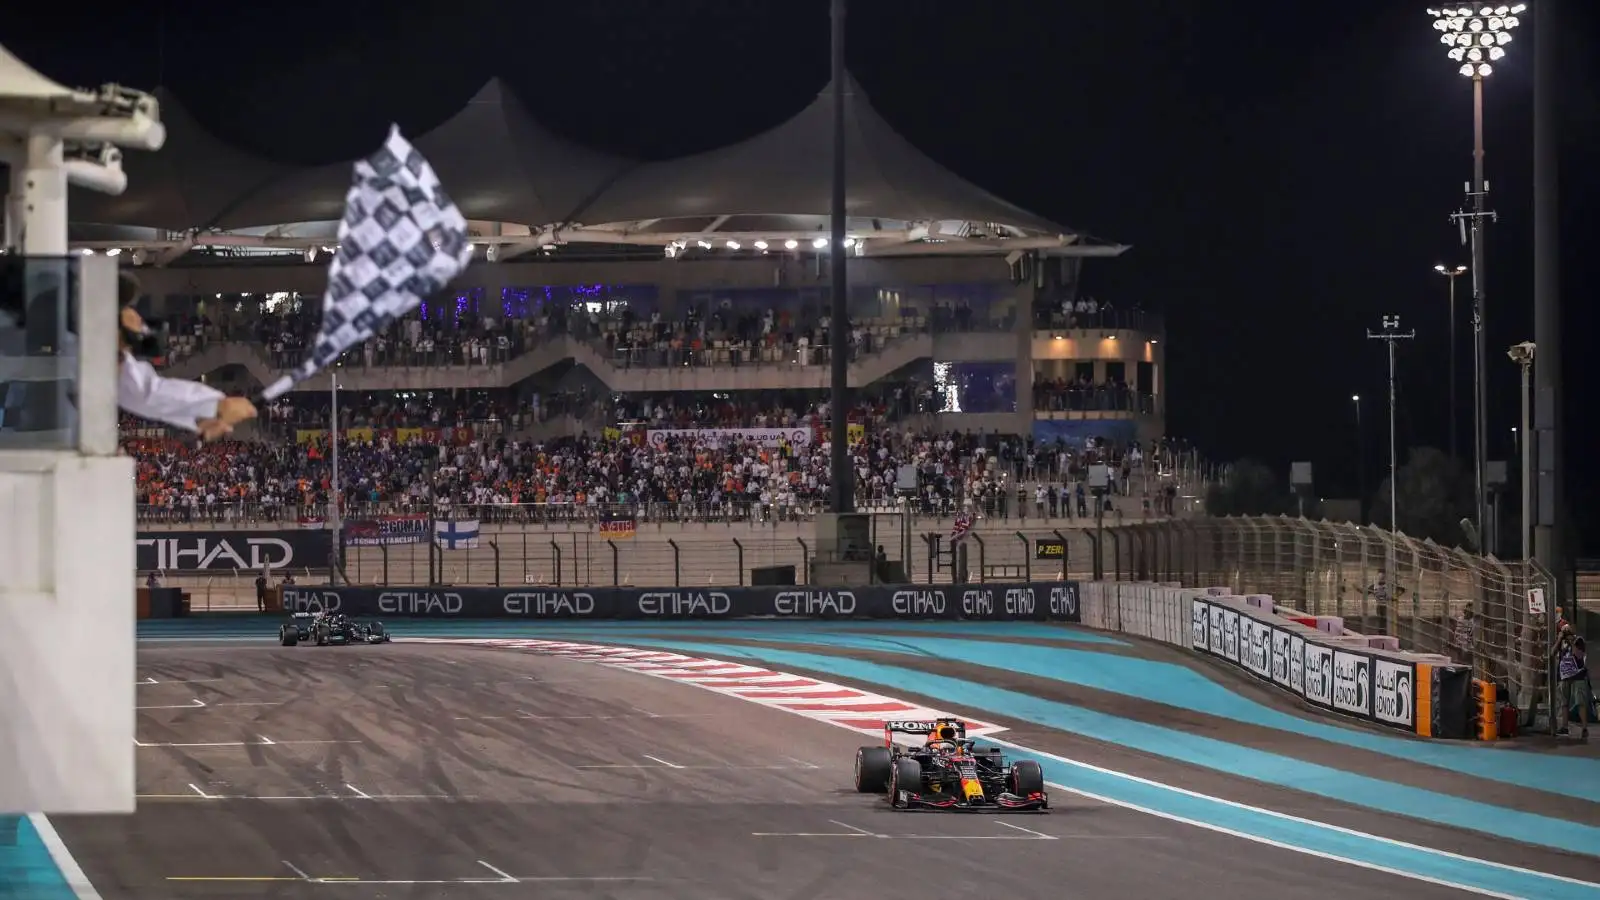 Max Verstappen takes the chequered flag at 2021 Abu Dhabi GP.